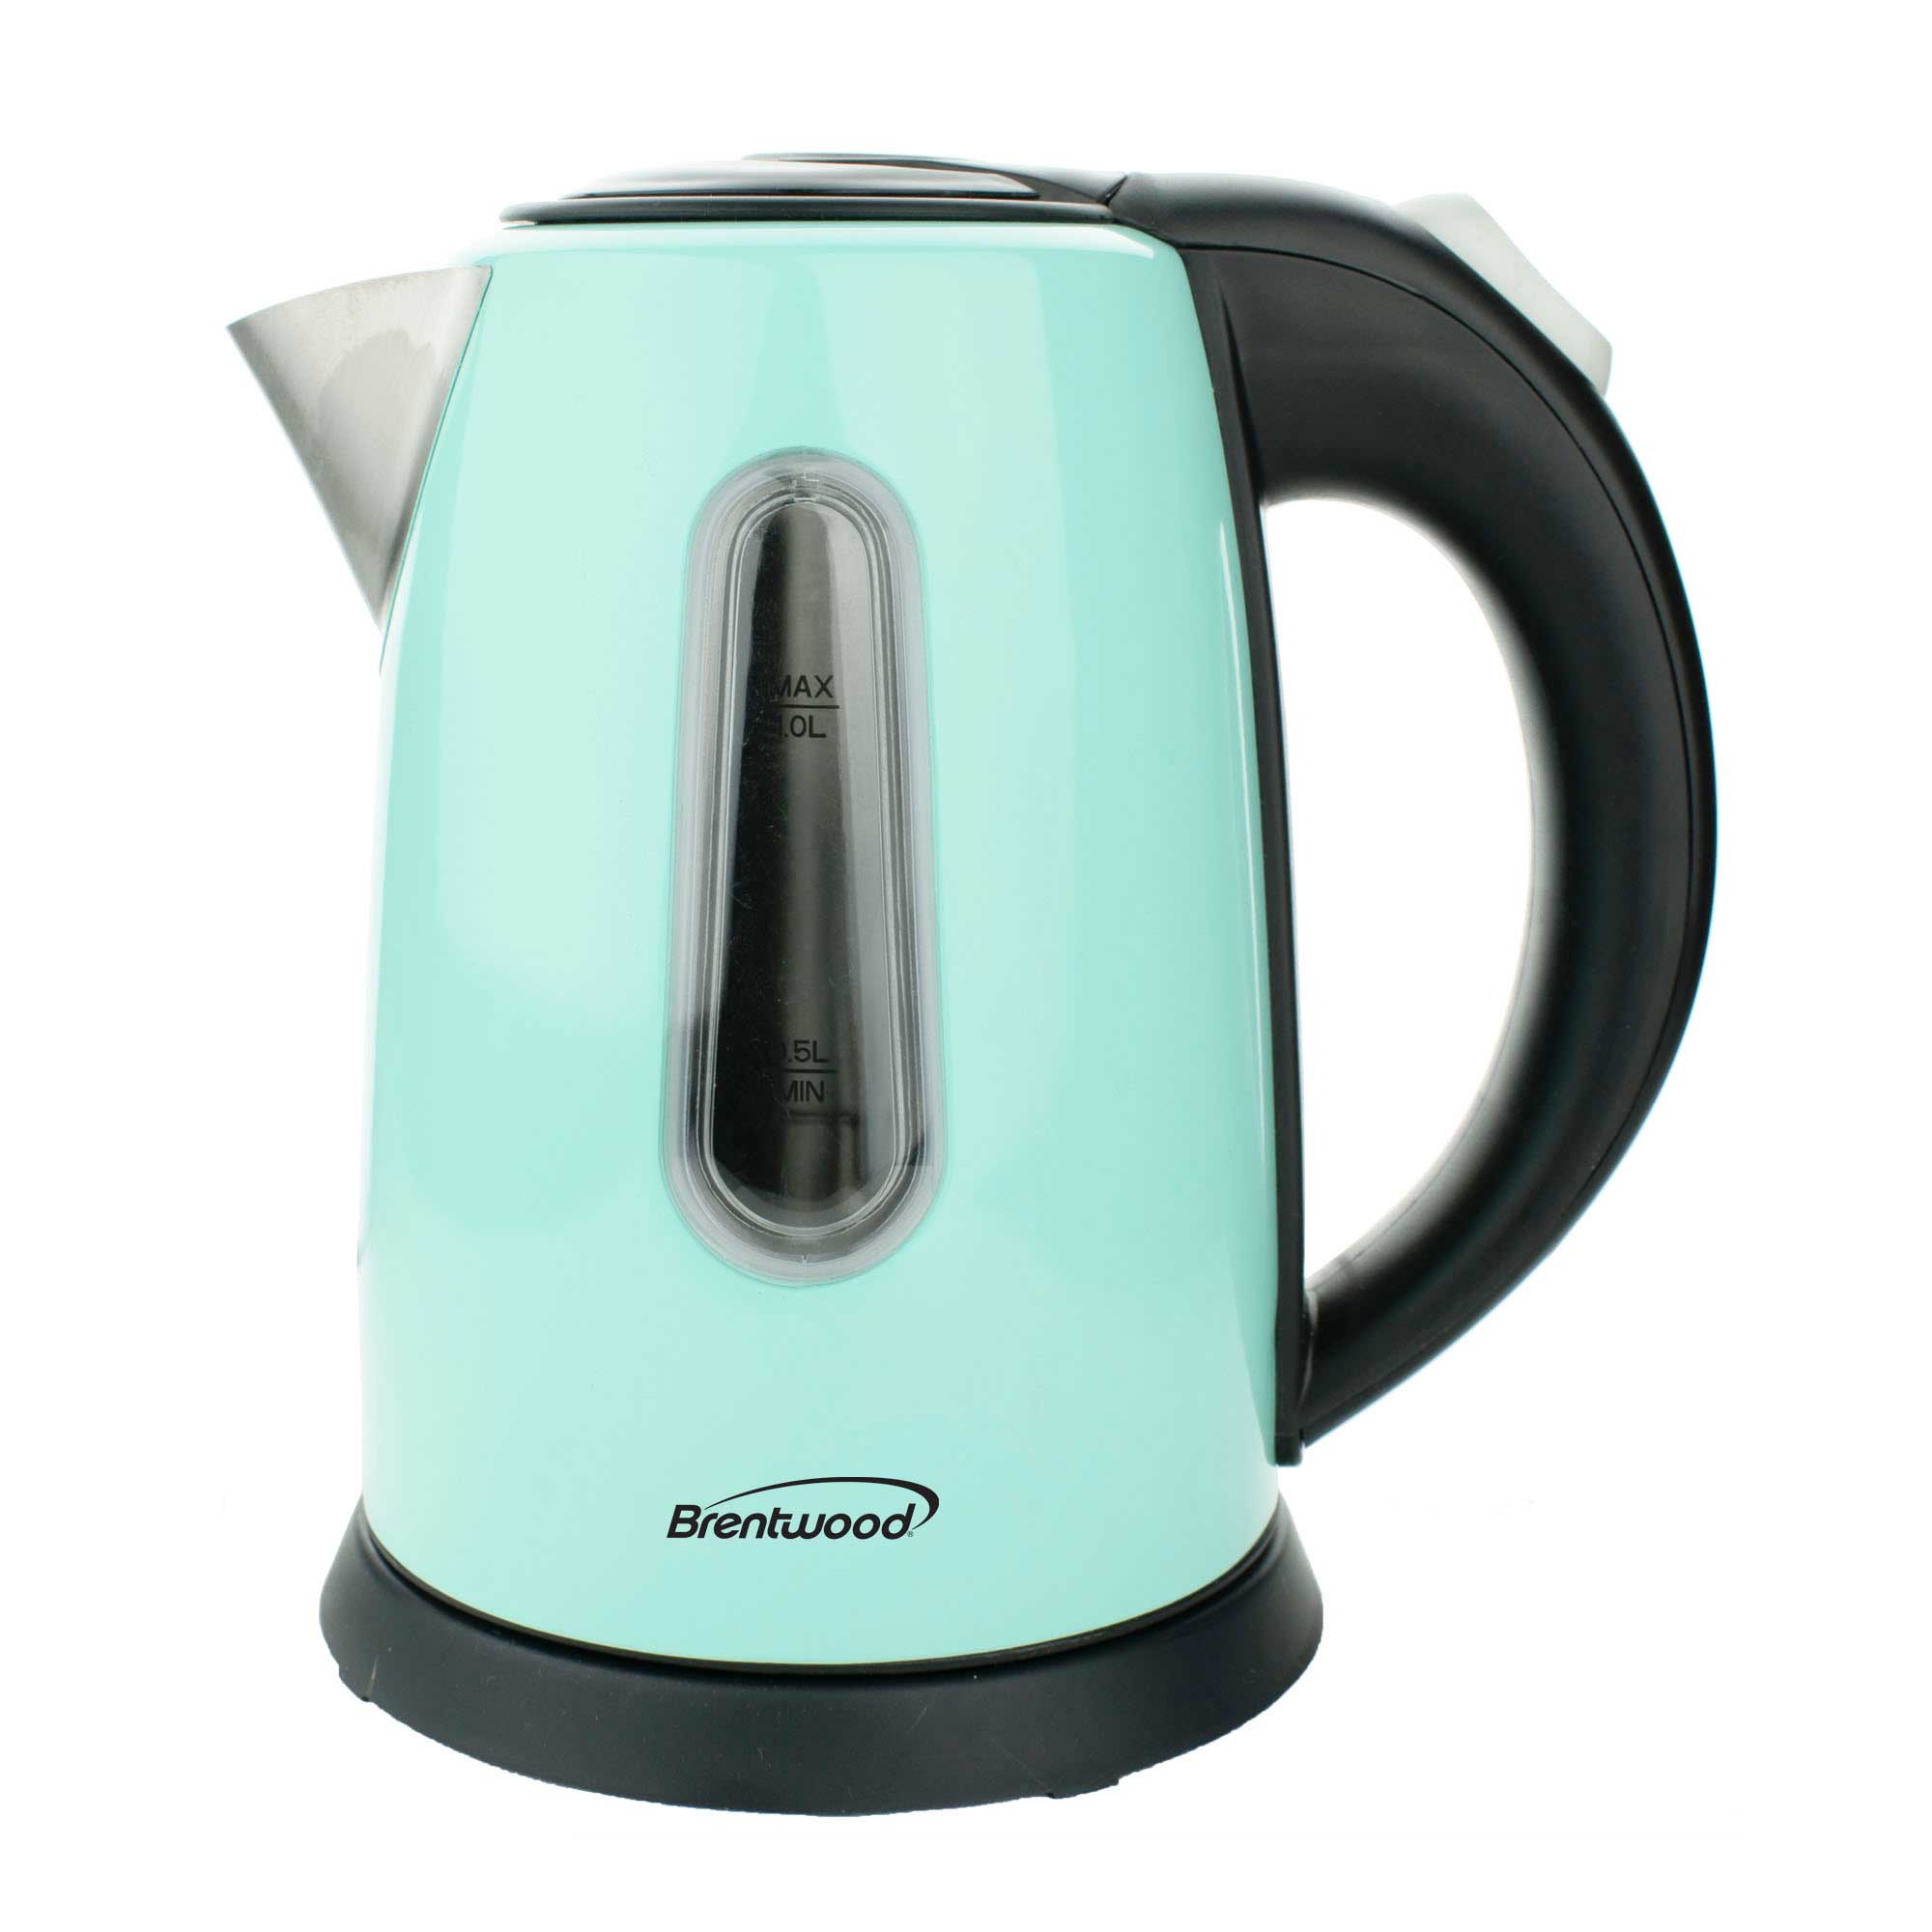 Brentwood KT-1710BL 1-Liter Stainless Steel Cordless Electric Kettle, Blue